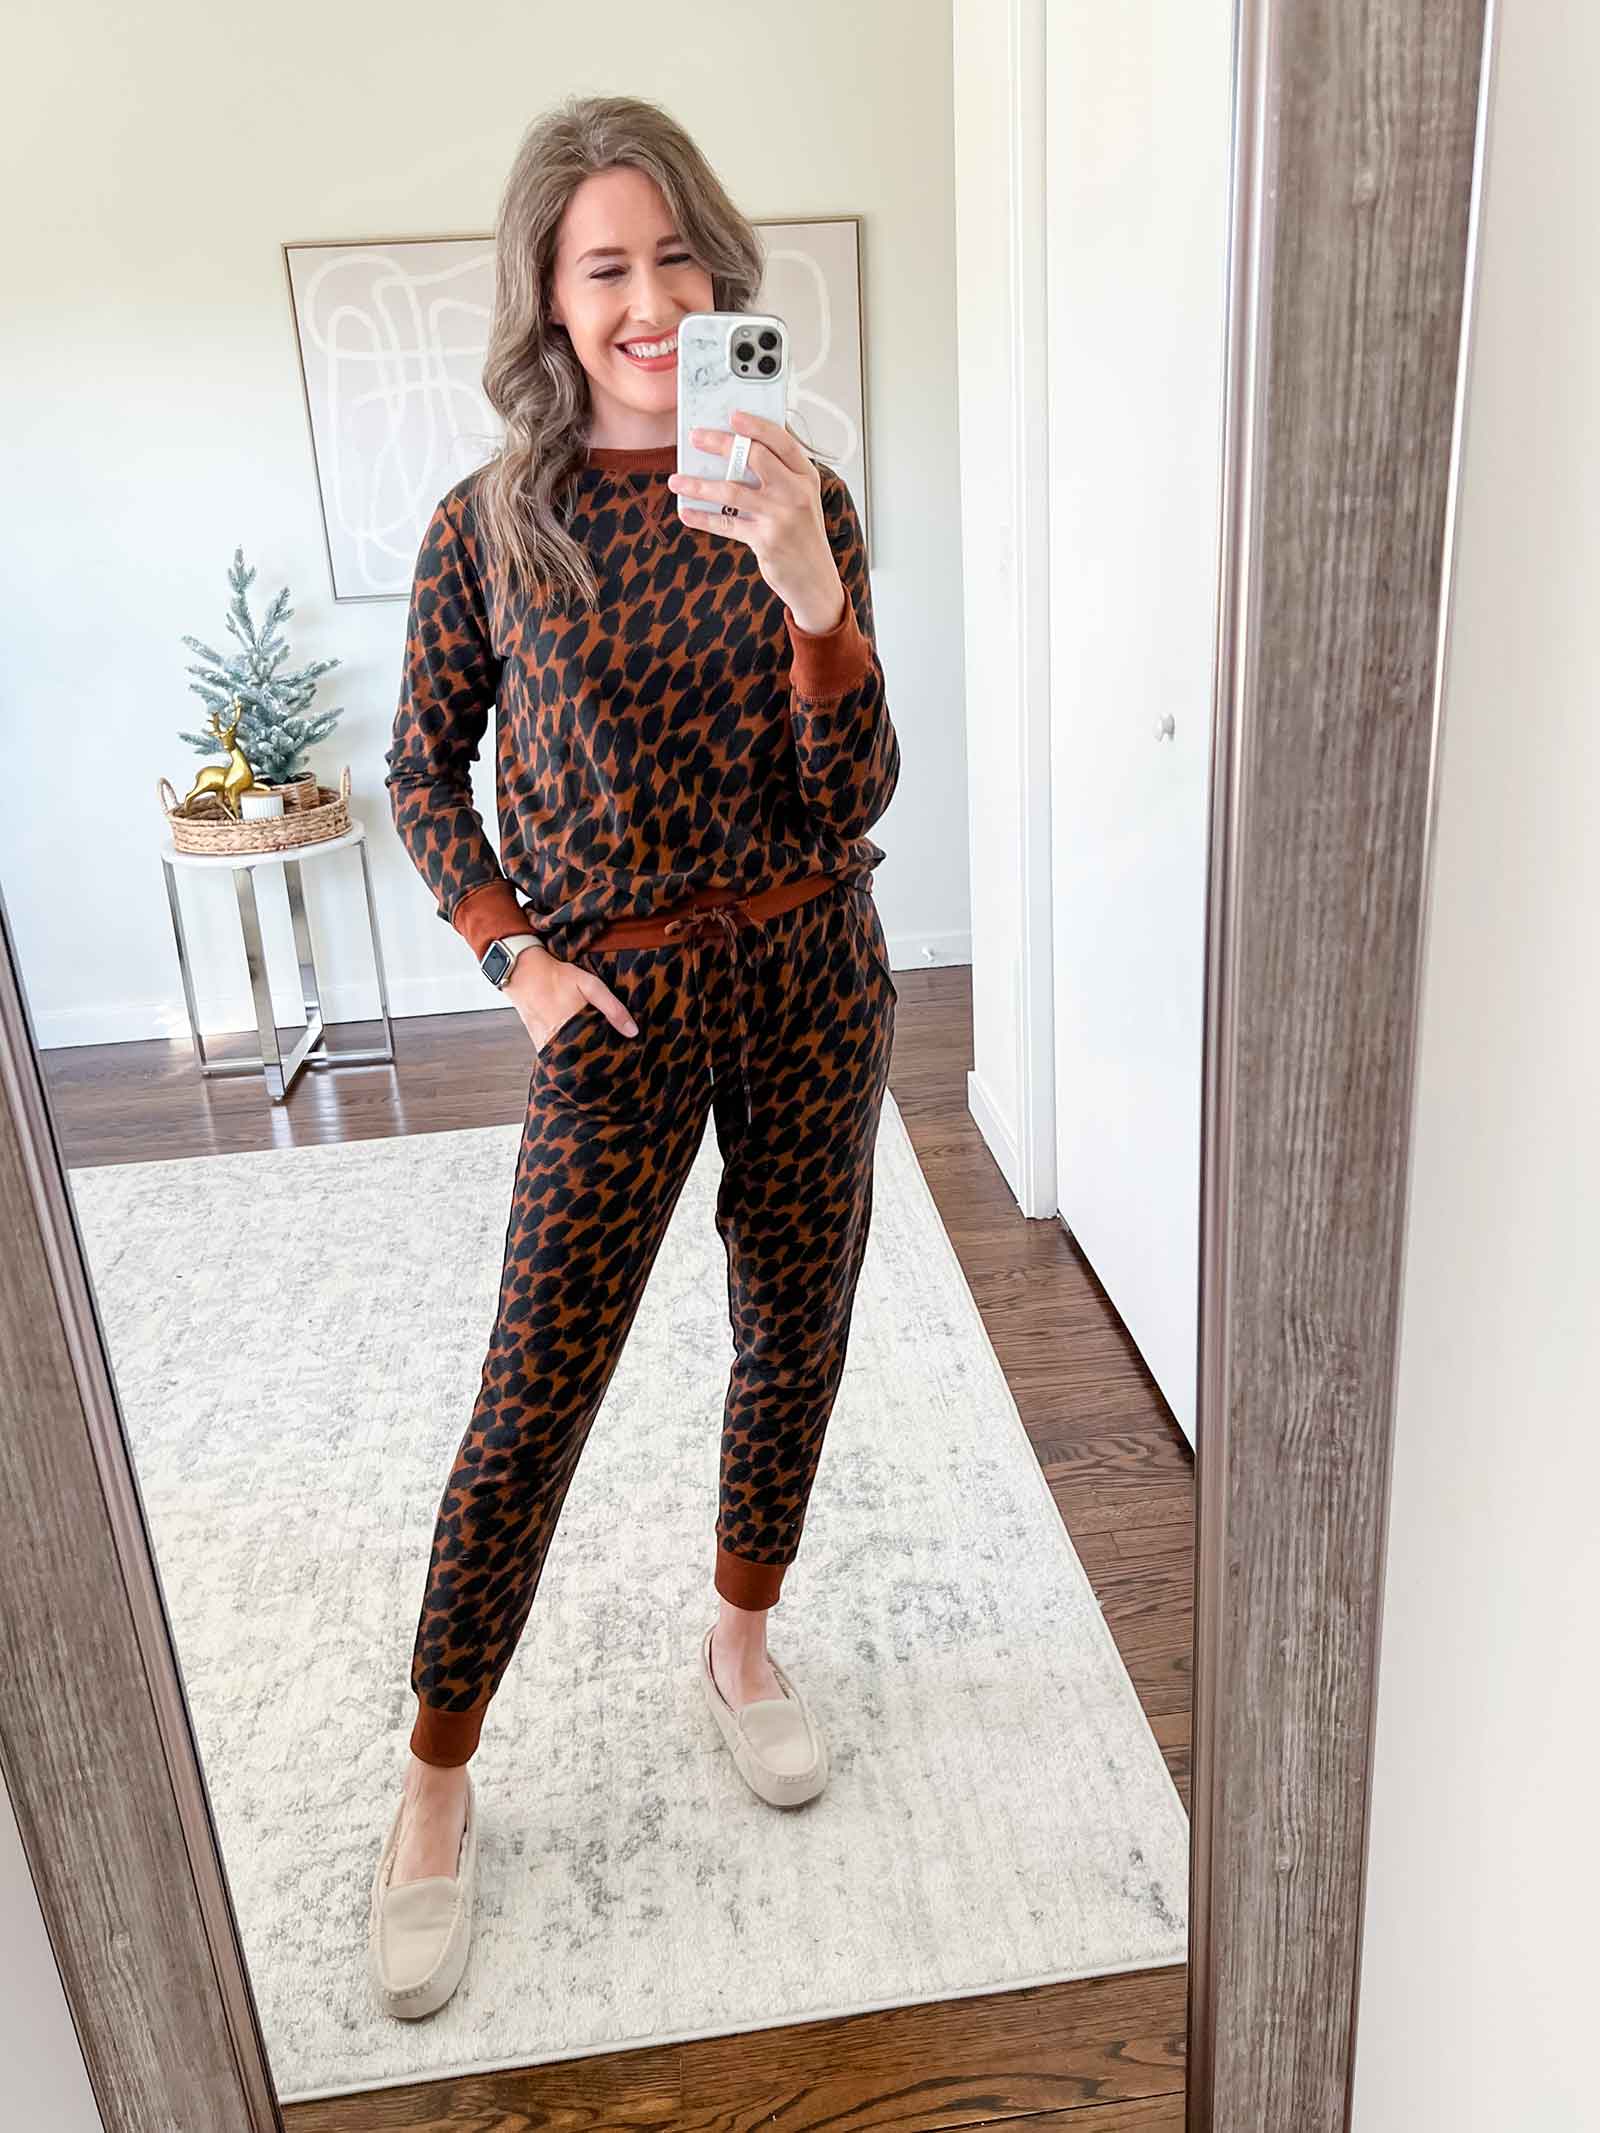 3 Target Pajama Sets That are Perfect for Gifting